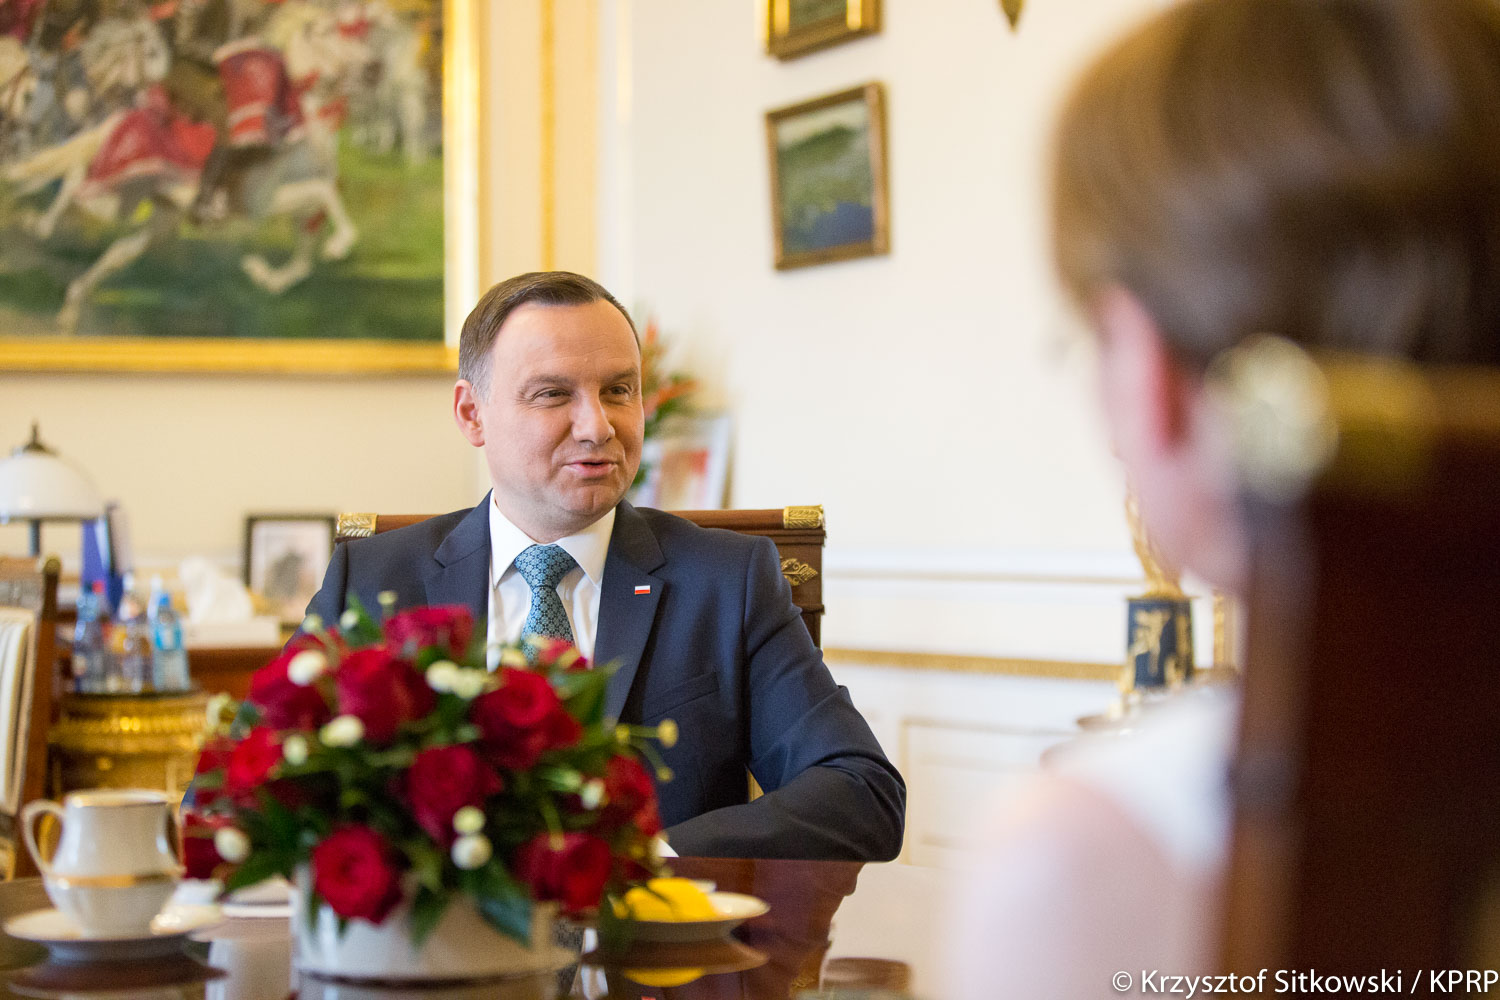 Poland fully committed to EU: President Duda